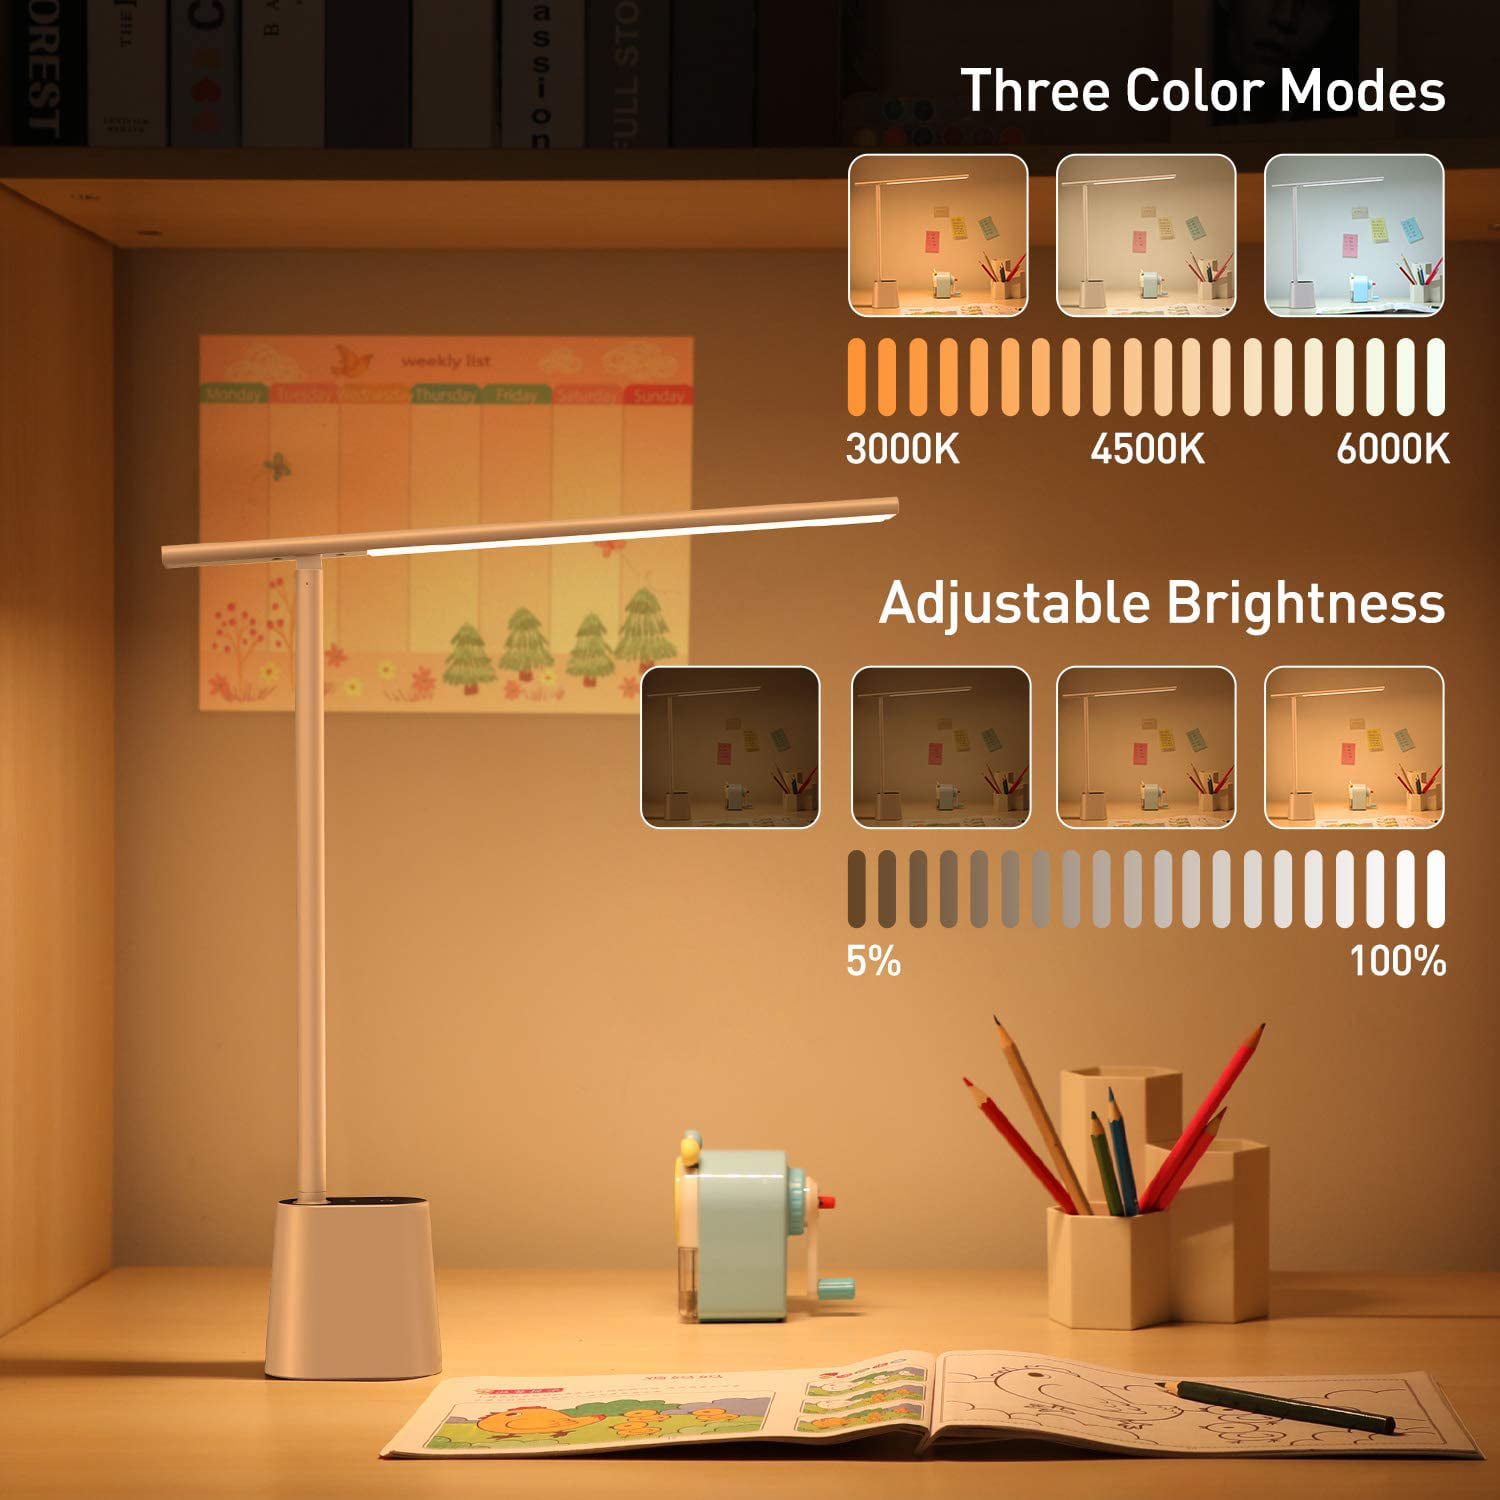 47 Wide Illumination Bedroom Painting 5W 3 Color Modes for Home Office Auto-Dimming Table Lamp Touch Control Living Room Eye-Caring Smart Lamp Baseus LED Desk Lamp 250 Lumens White 